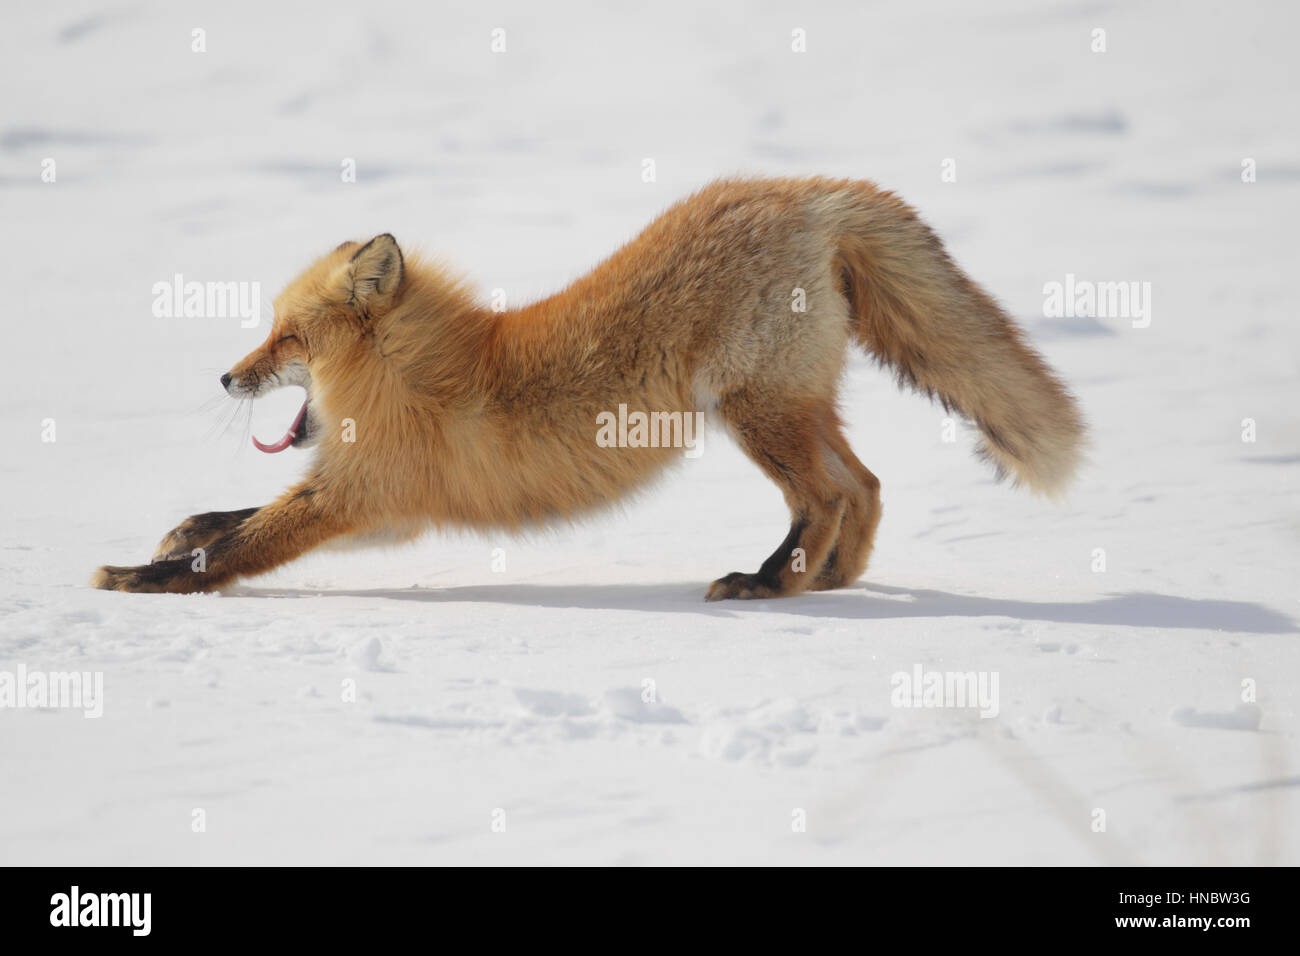 Hokkaido Red Fox (Vulpes vulpes schrencki), a particularly furry subspecies of the widespread fox, against winter snow, on Hokkaido, Japan Stock Photo